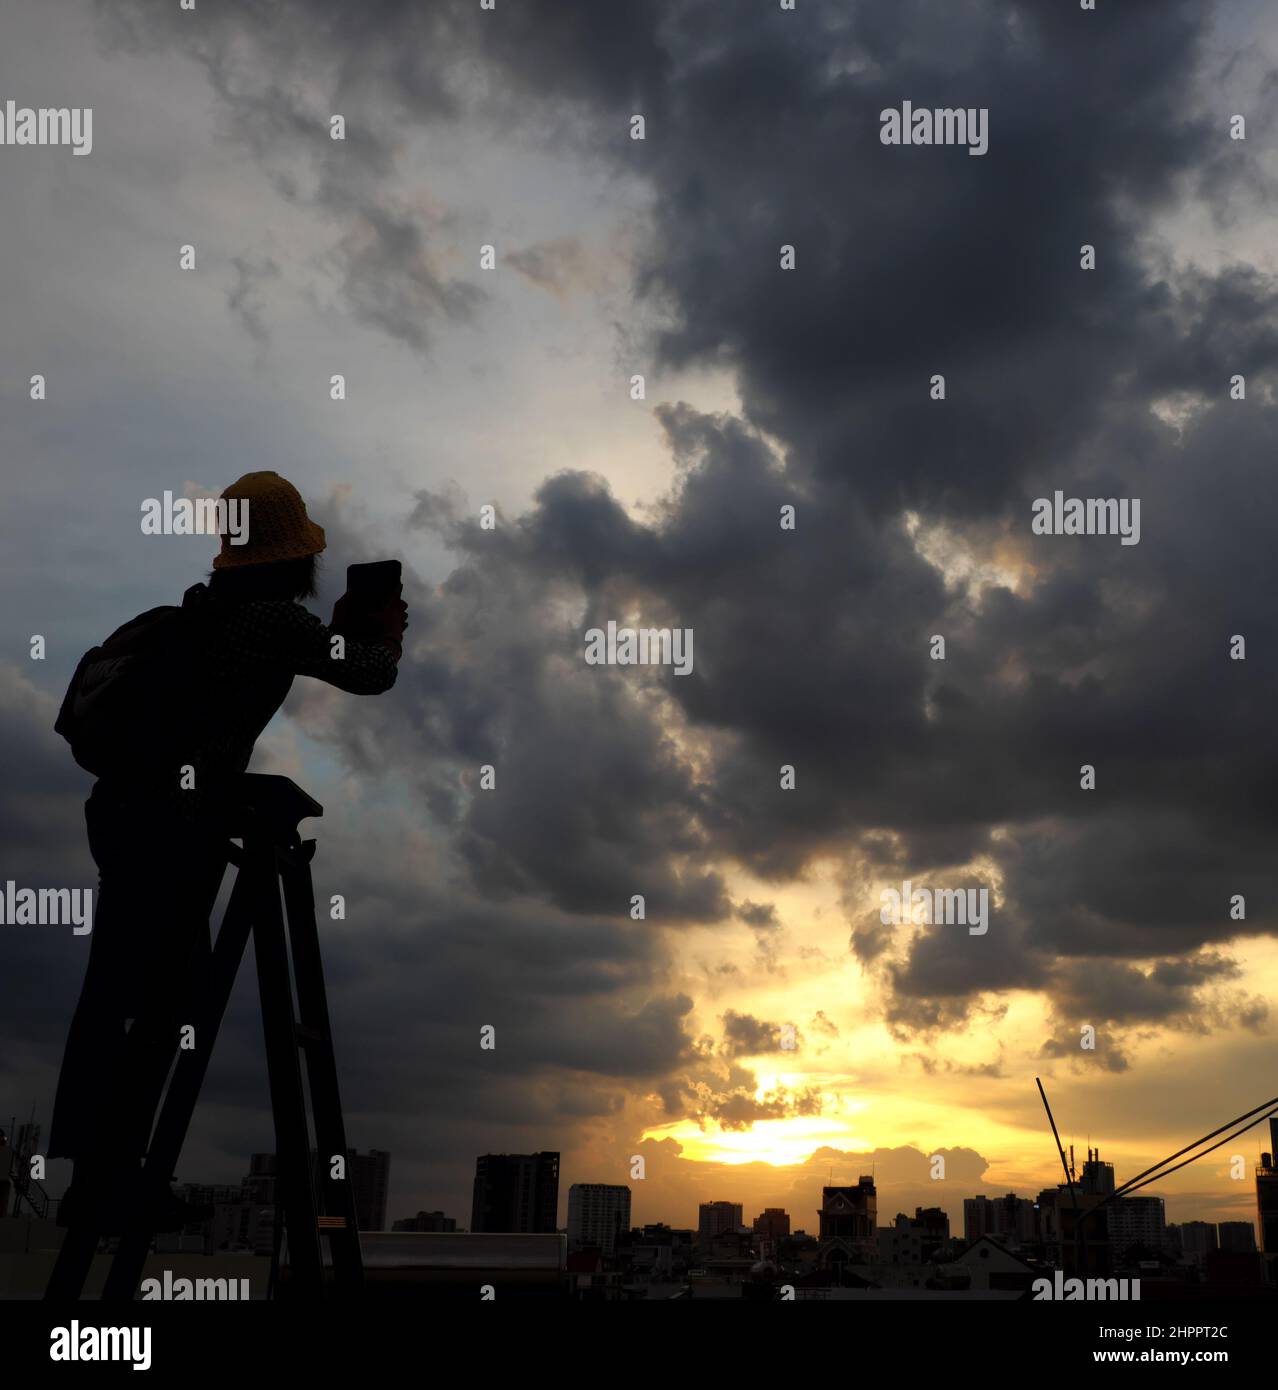 Amazing scene from Vietnamese woman when stay at home by social distancing, she make fun at sunset on rooftop by stand on ladder when sun go down to m Stock Photo